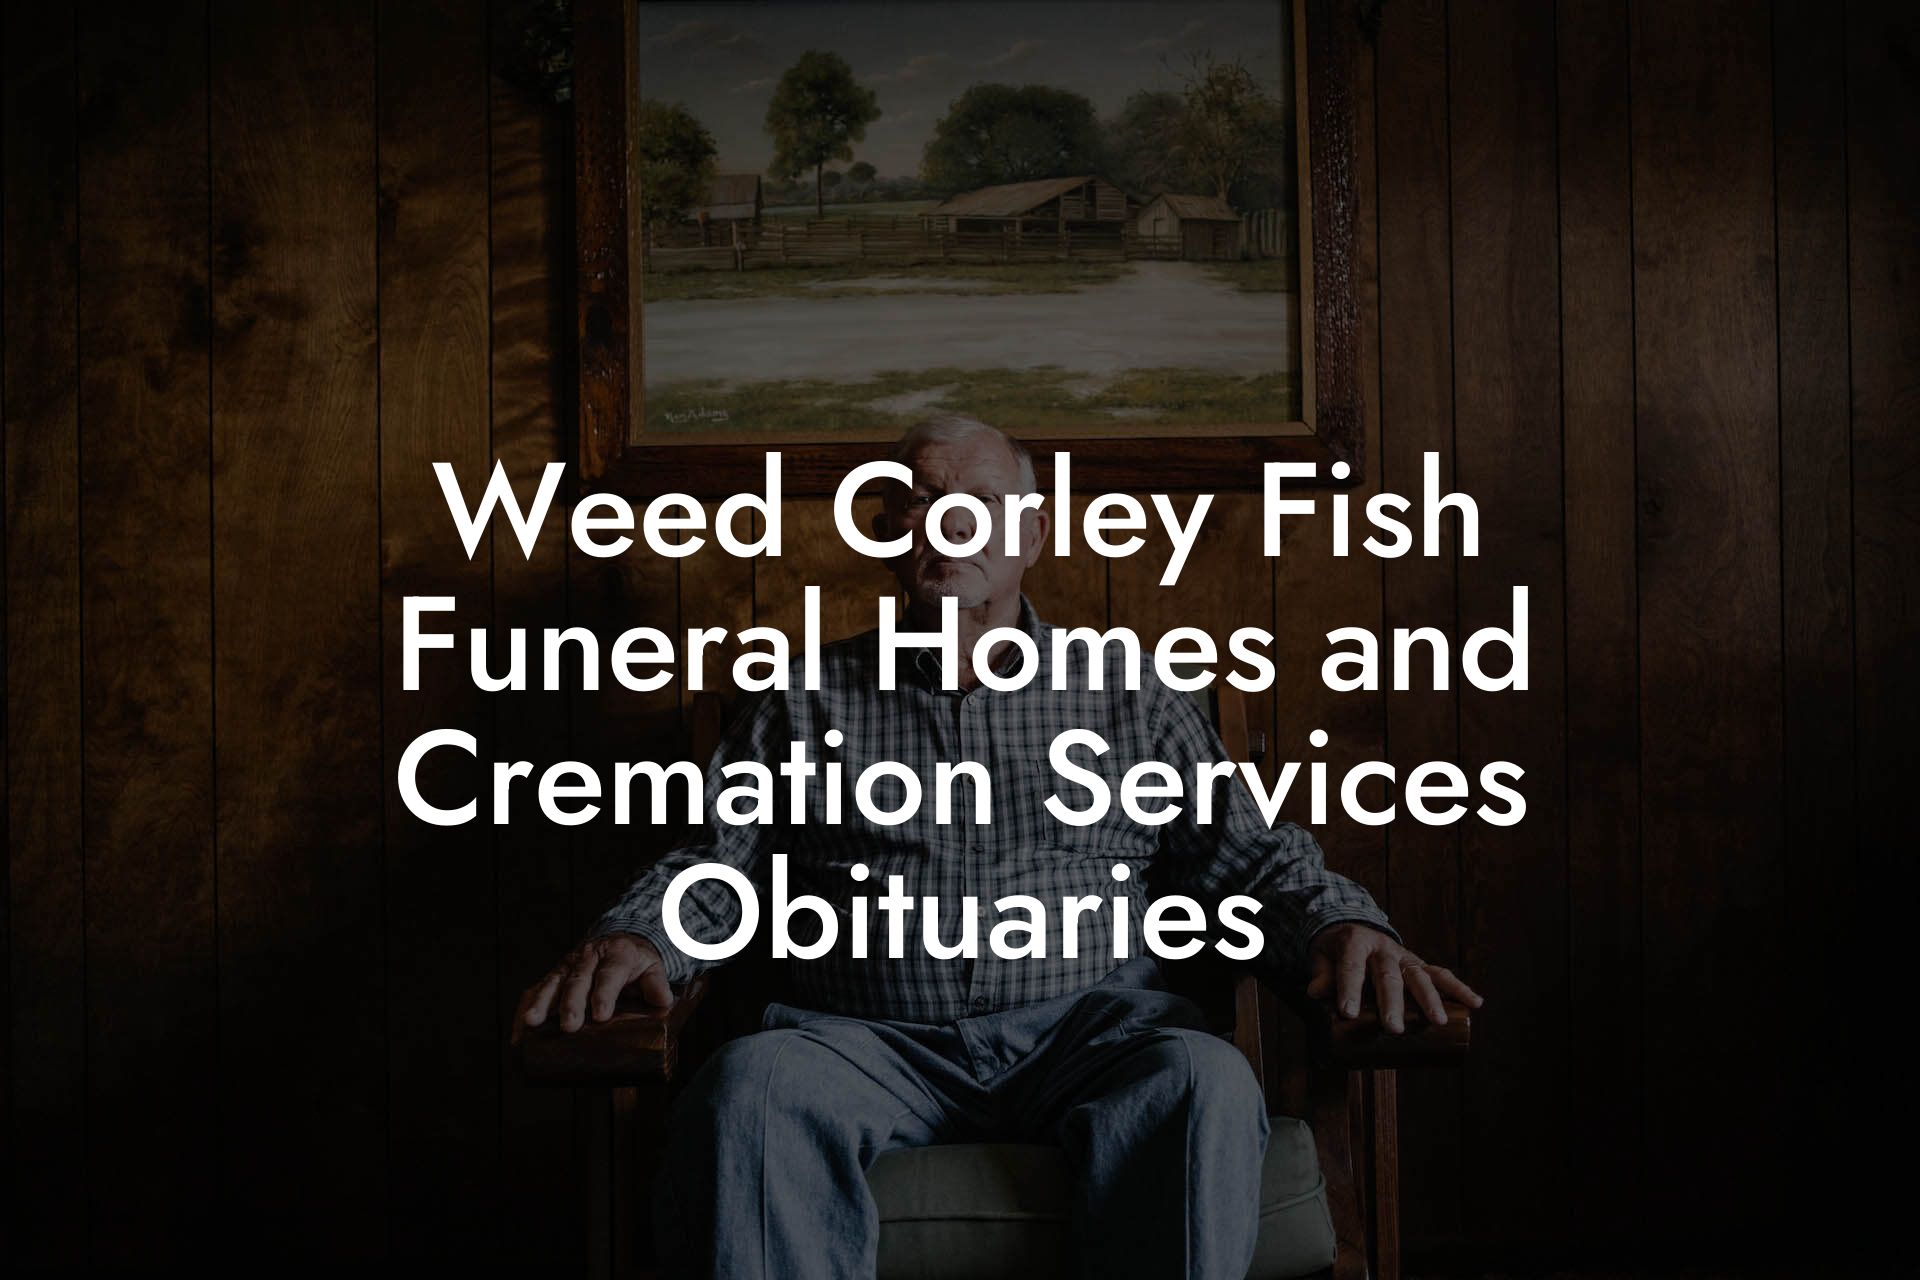 Weed Corley Fish Funeral Homes and Cremation Services Obituaries